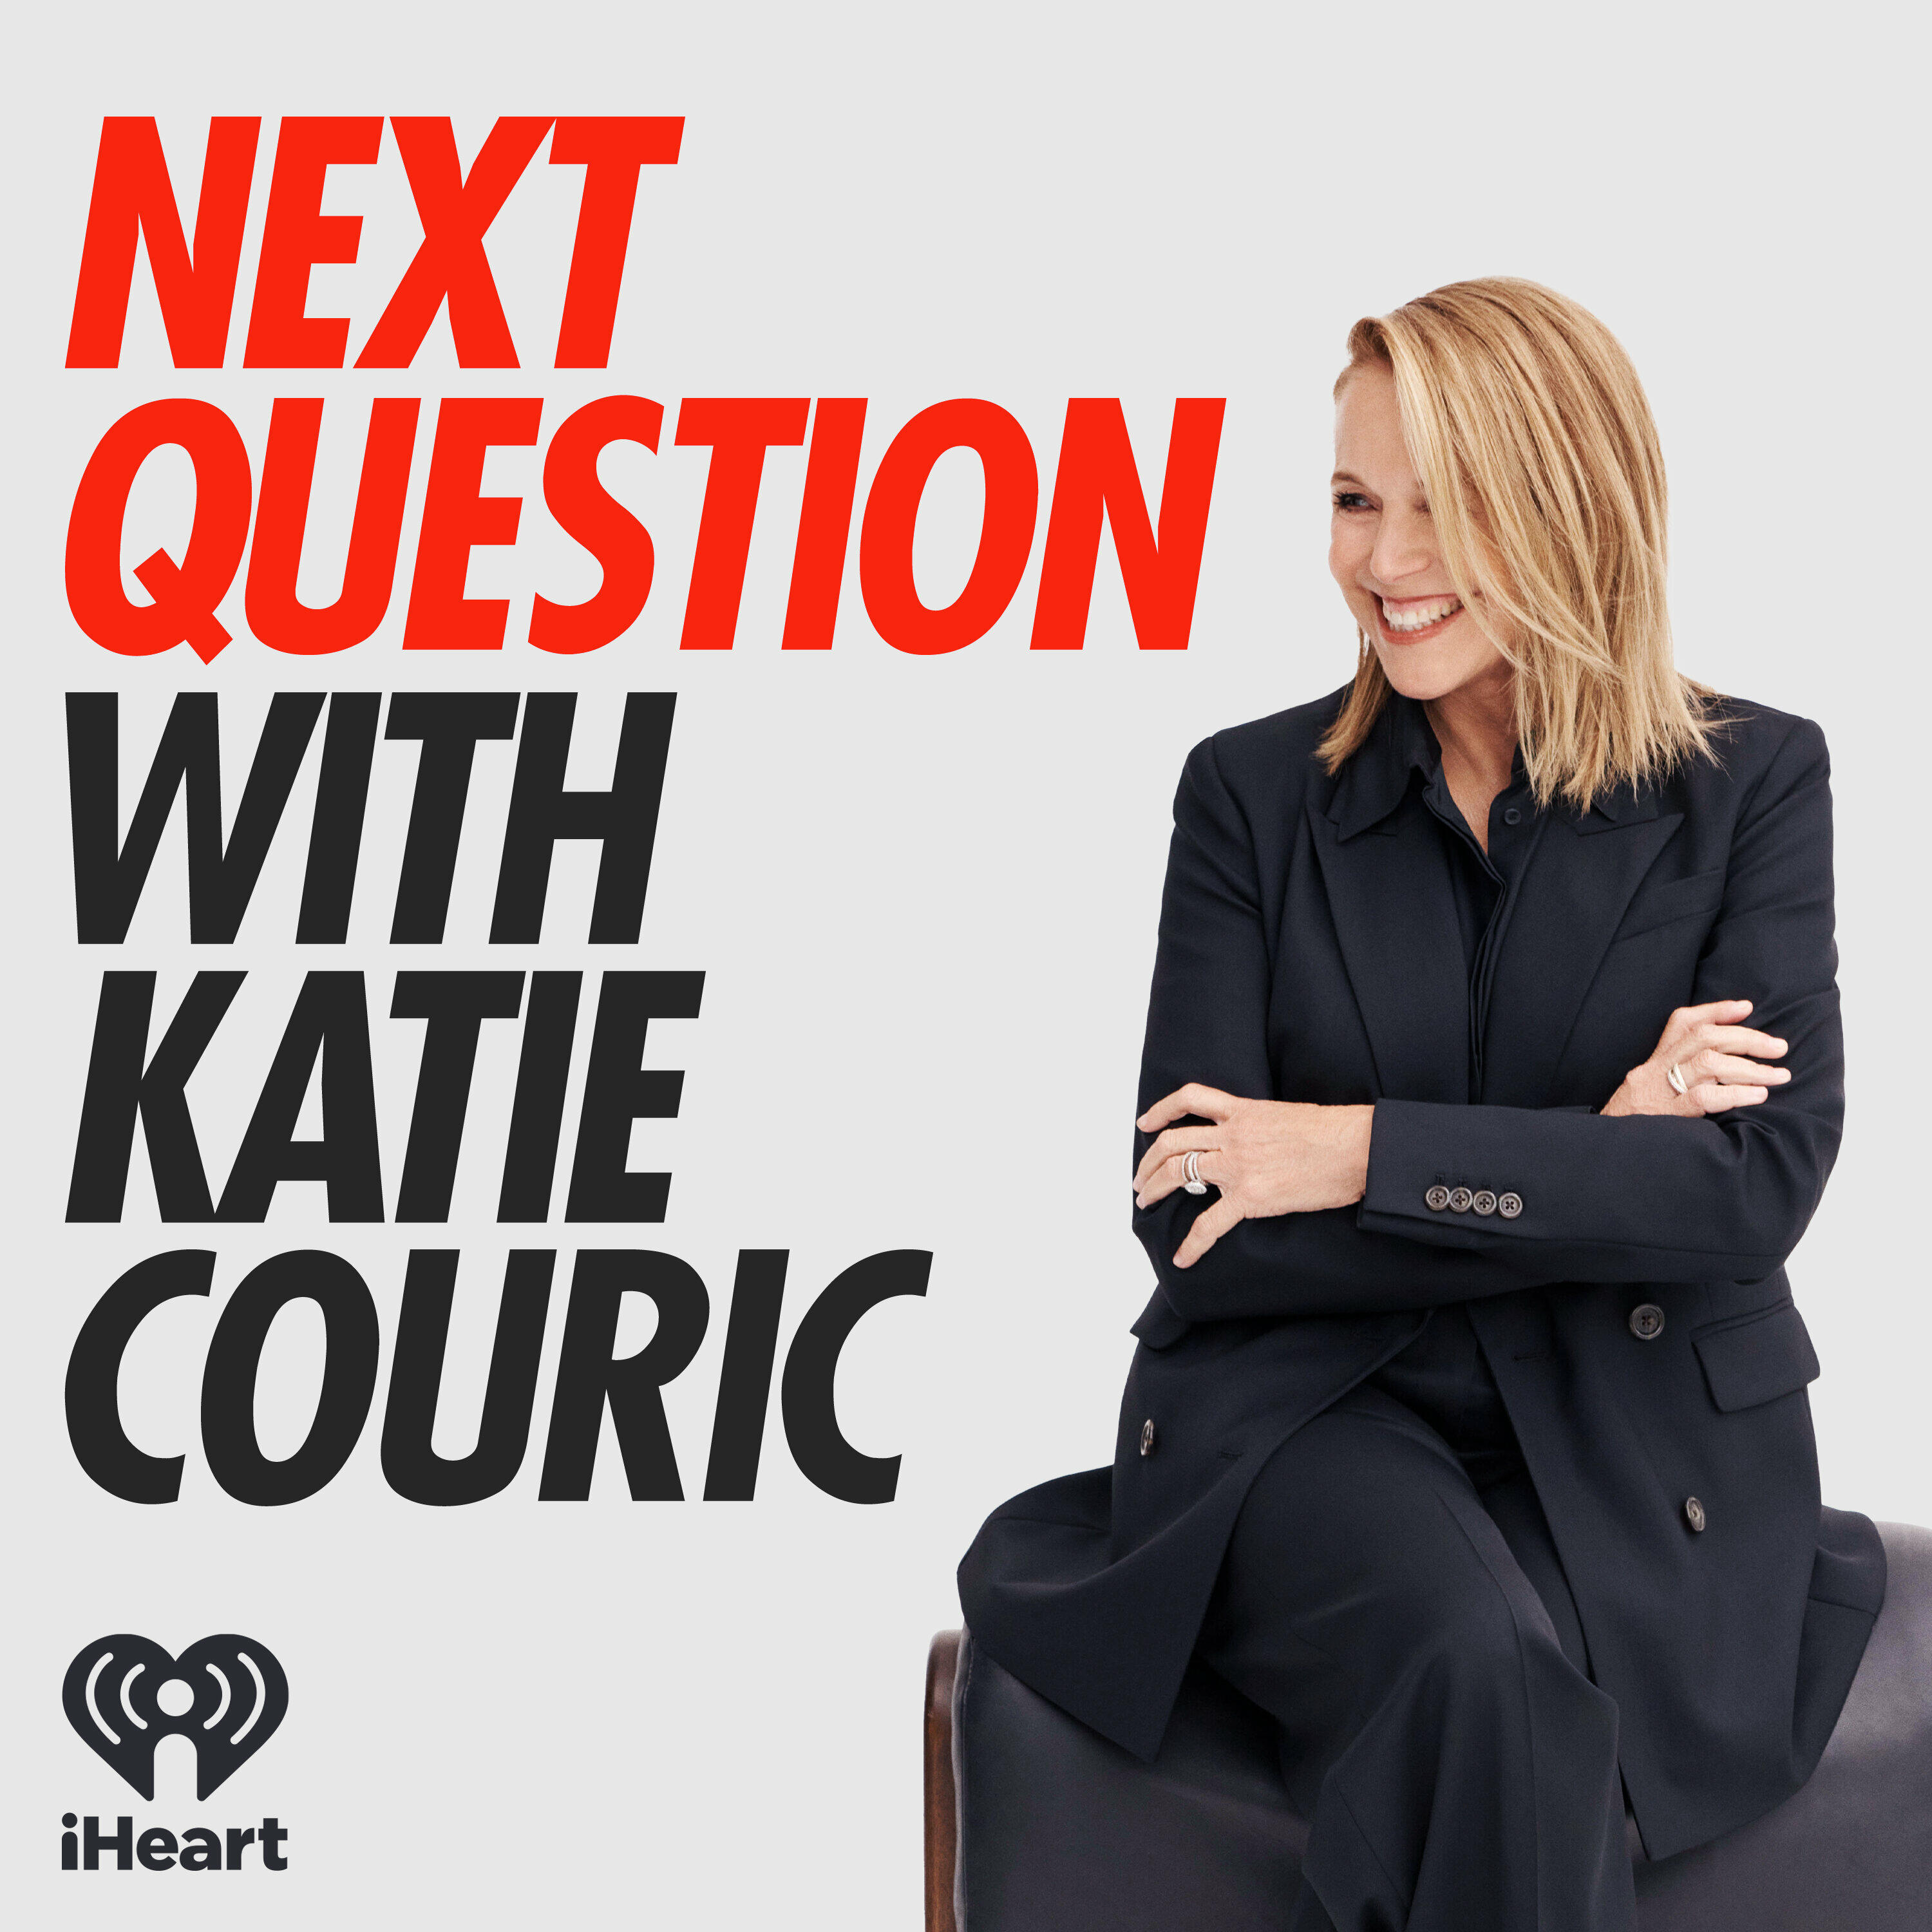 Amanda Seyfried On Becoming The Unknowable Elizabeth Holmes Next Question With Katie Couric 